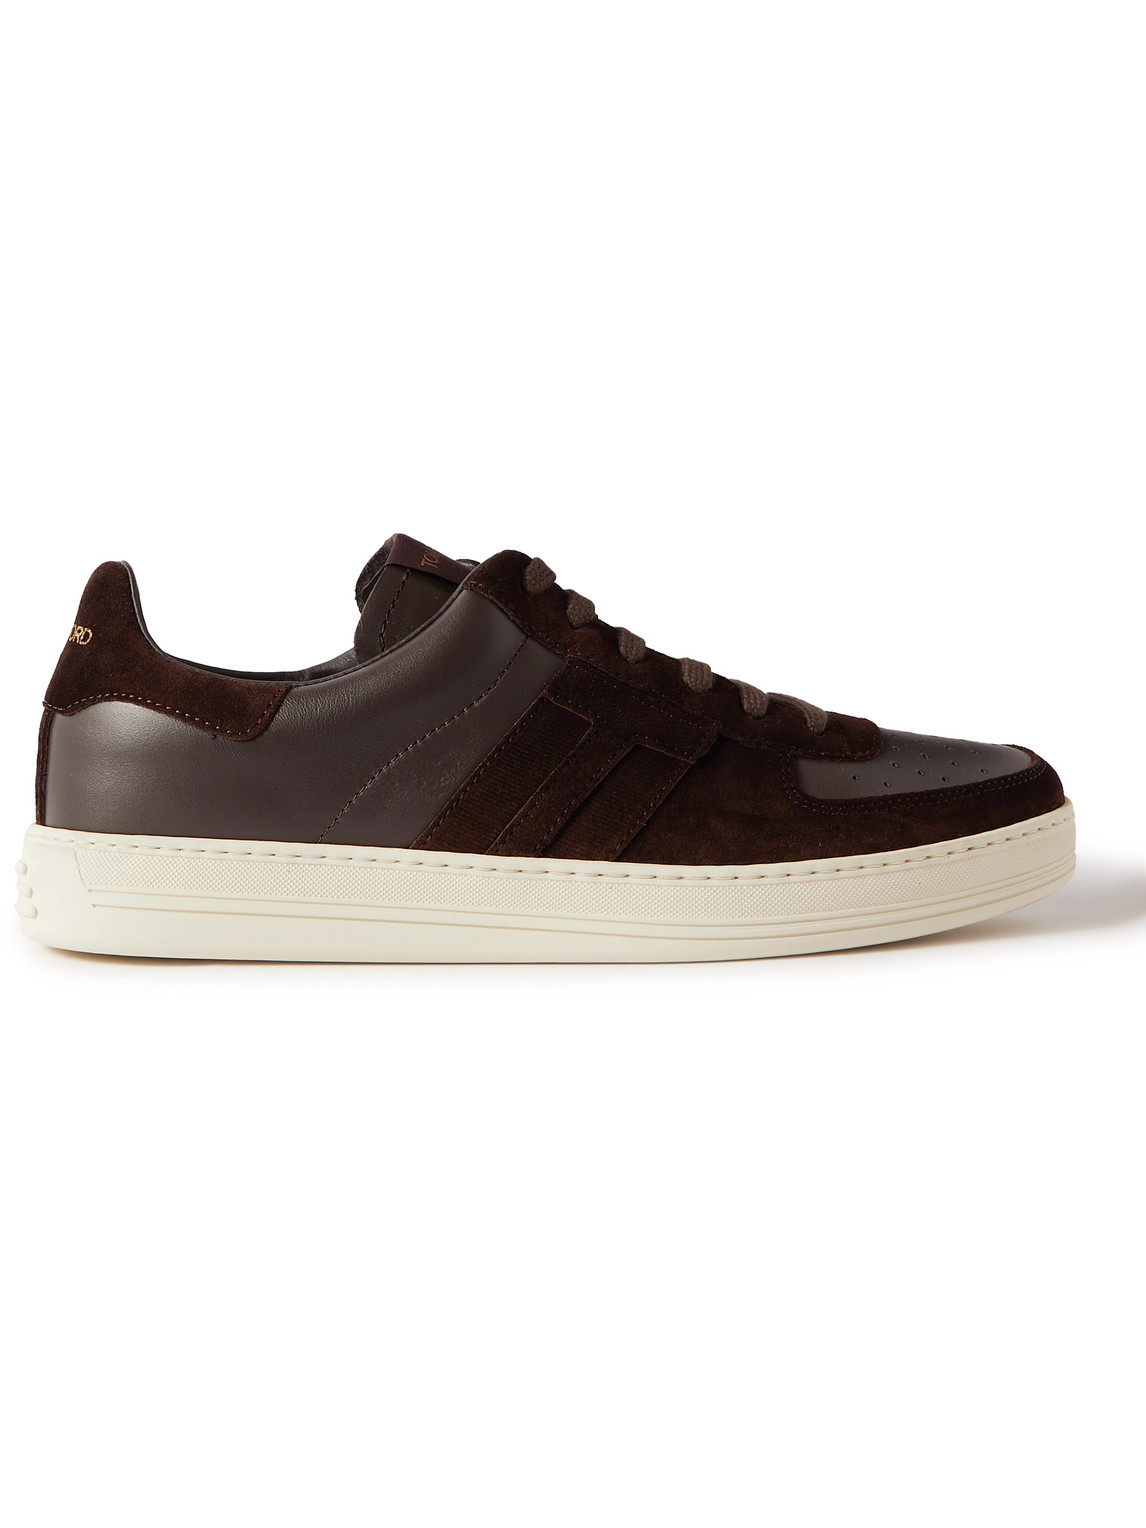 Tom Ford Radcliffe Suede And Leather Trainers In Brown